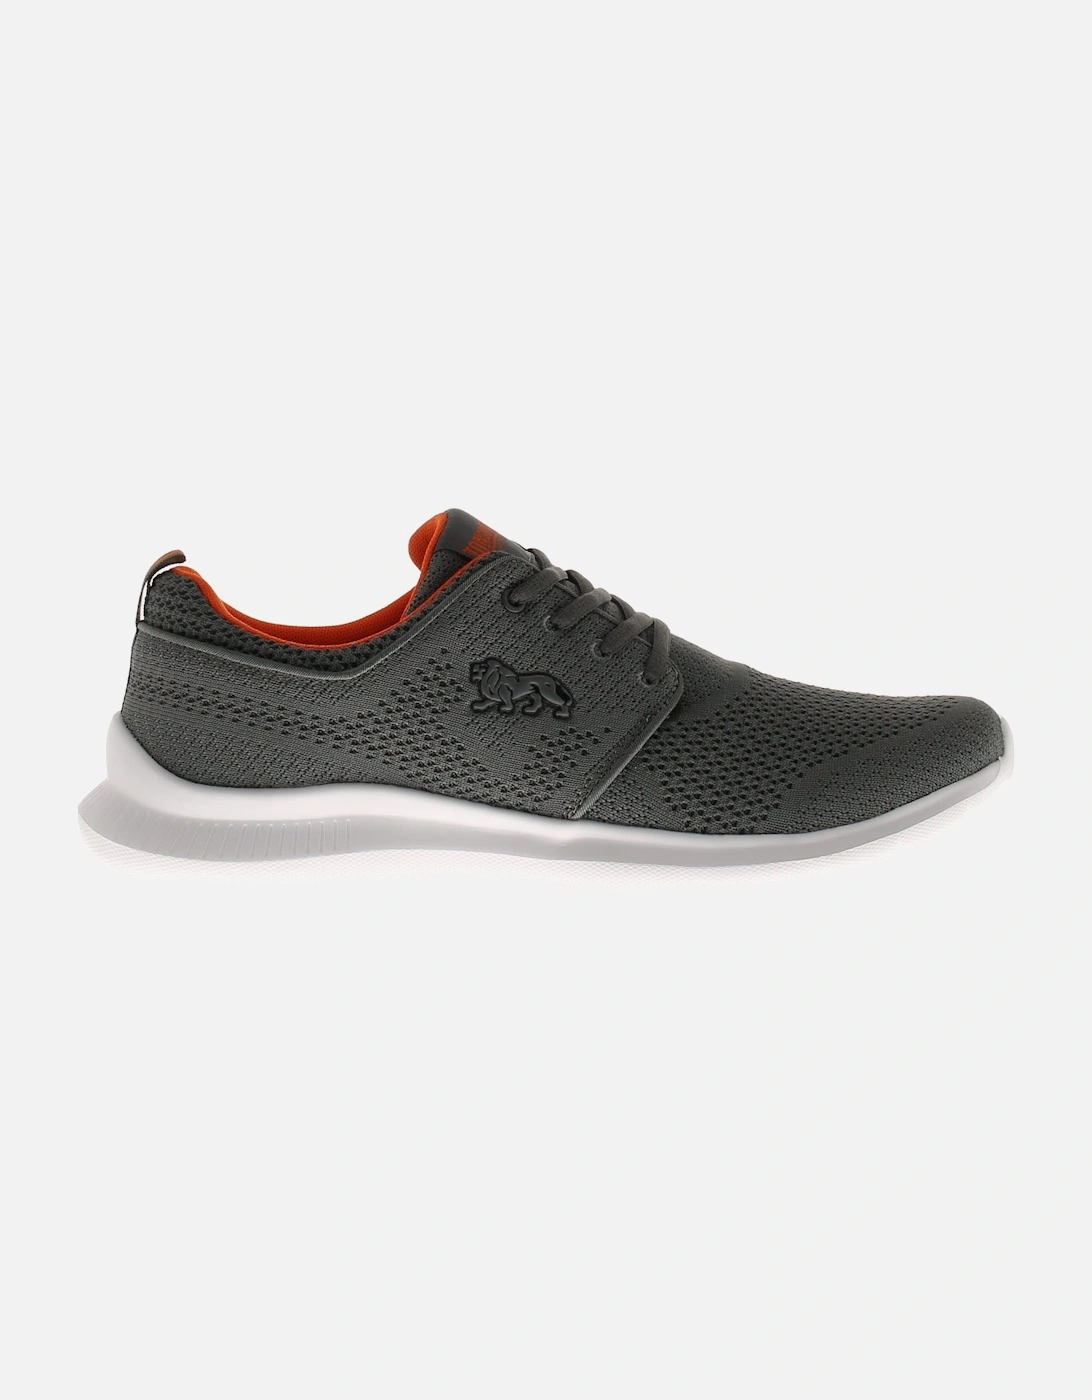 Mens Trainers Durham Lace Up grey UK Size